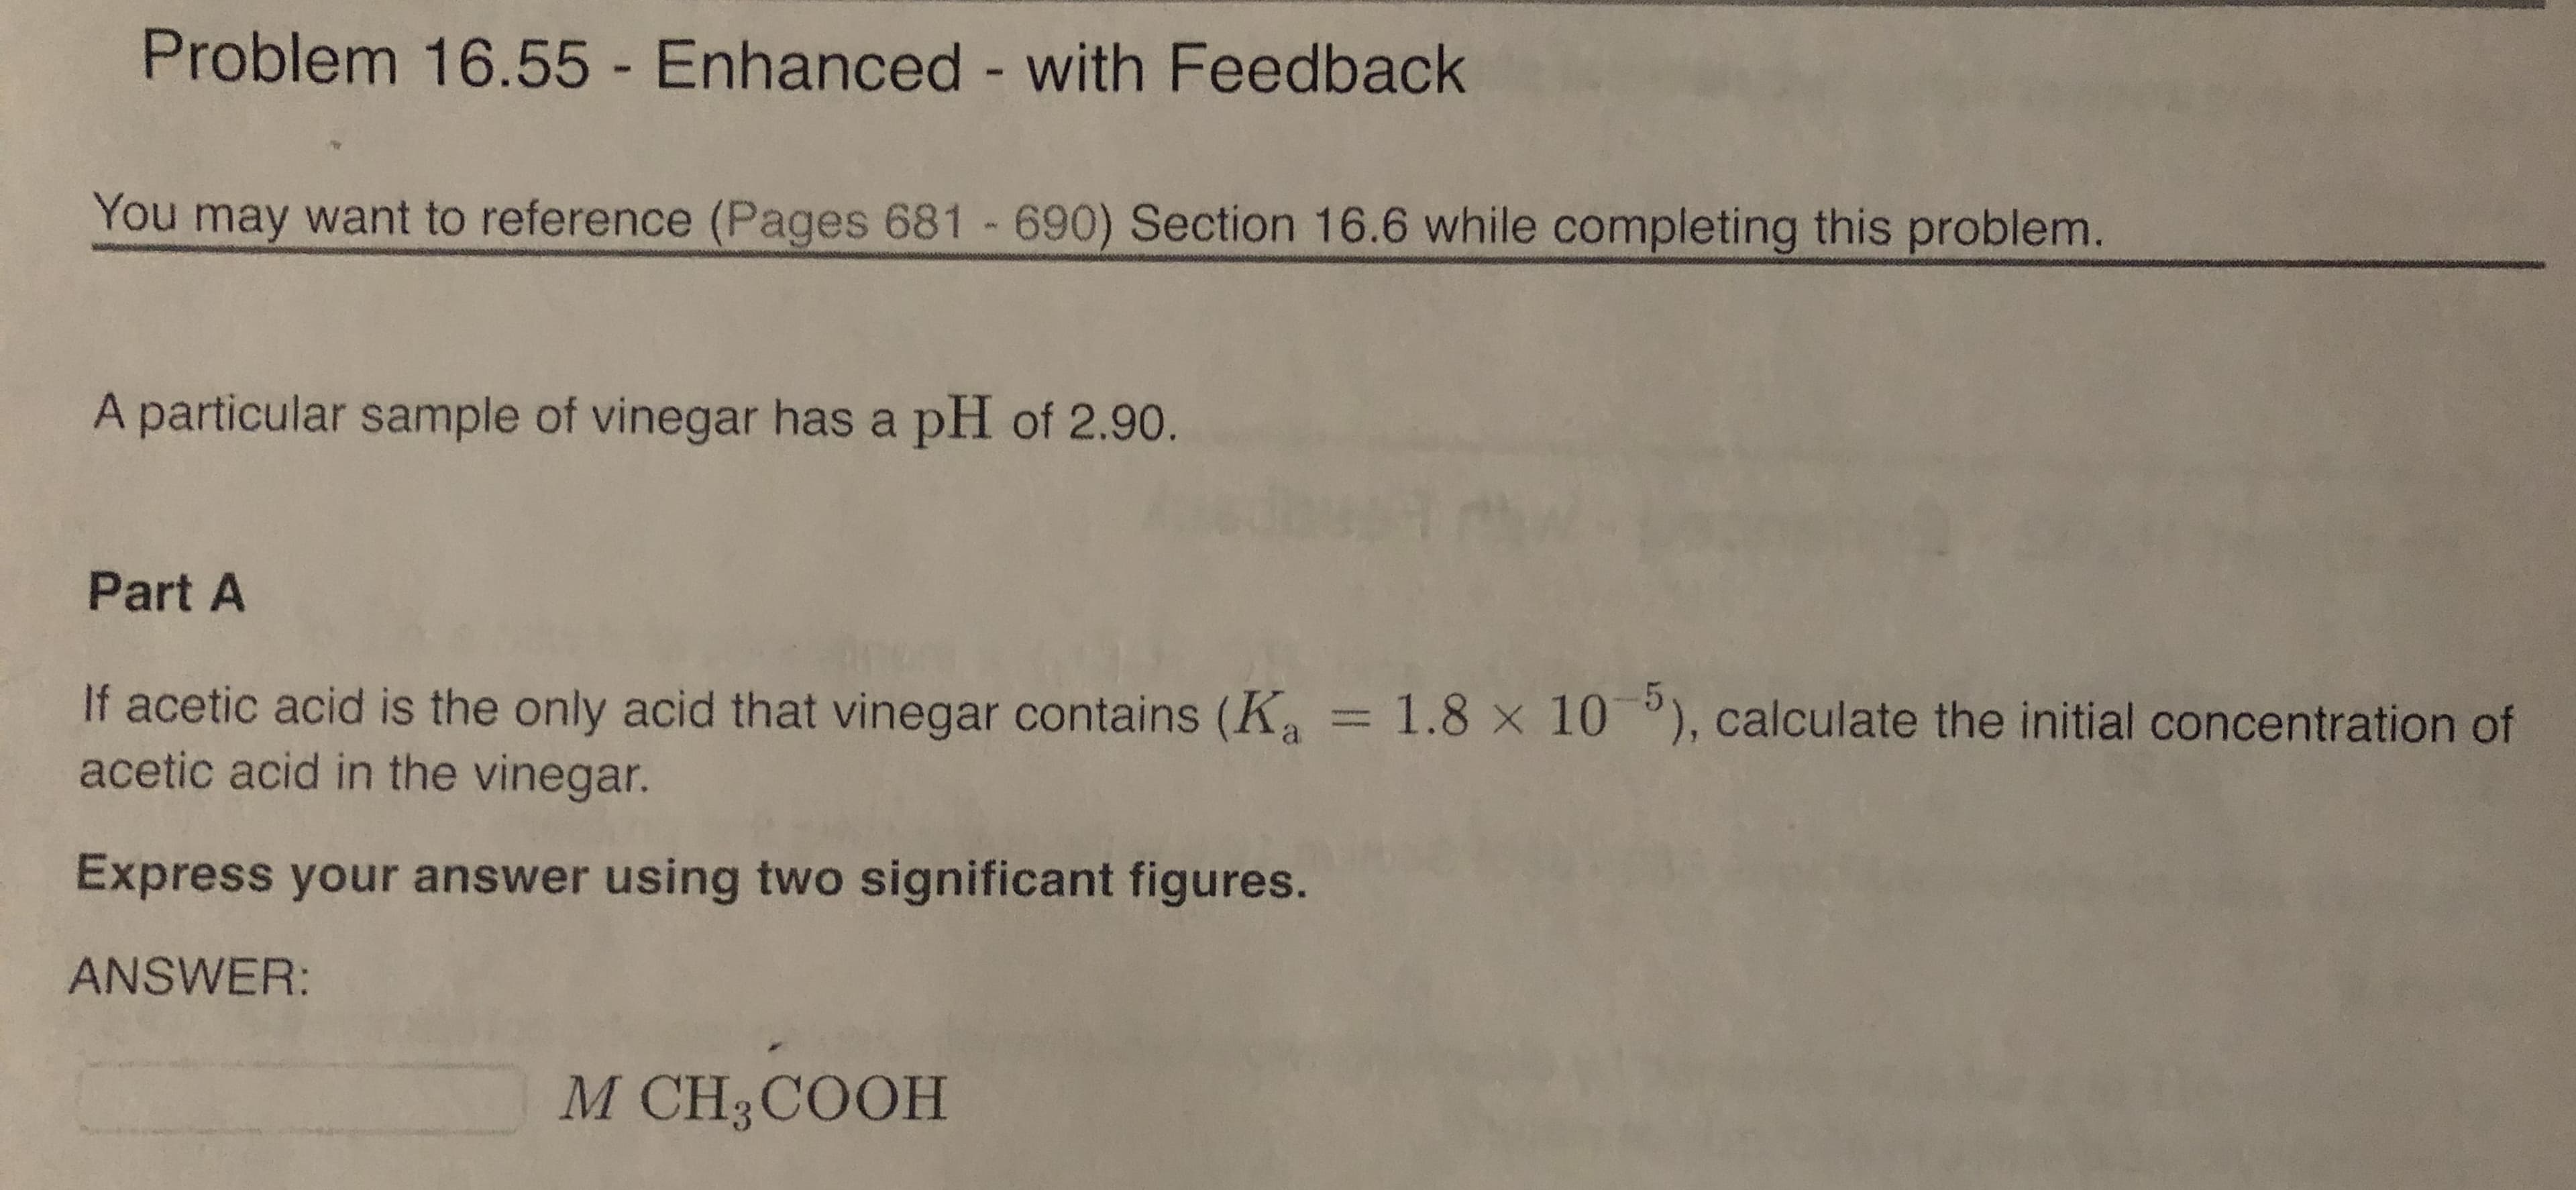 Problem 16.55 - Enhanced - with Feedback
You may want to reference (Pages 681 690) Section 16.6 while completing this problem.
A particular sample of vinegar has a pH of 2.90.
Part A
If acetic acid is the only acid that vinegar contains (K = 1.8 x 10 ), calculate the initial concentration of
acetic acid in the vinegar.
Express your answer using two significant figures.
ANSWER:
M CH3COOH
